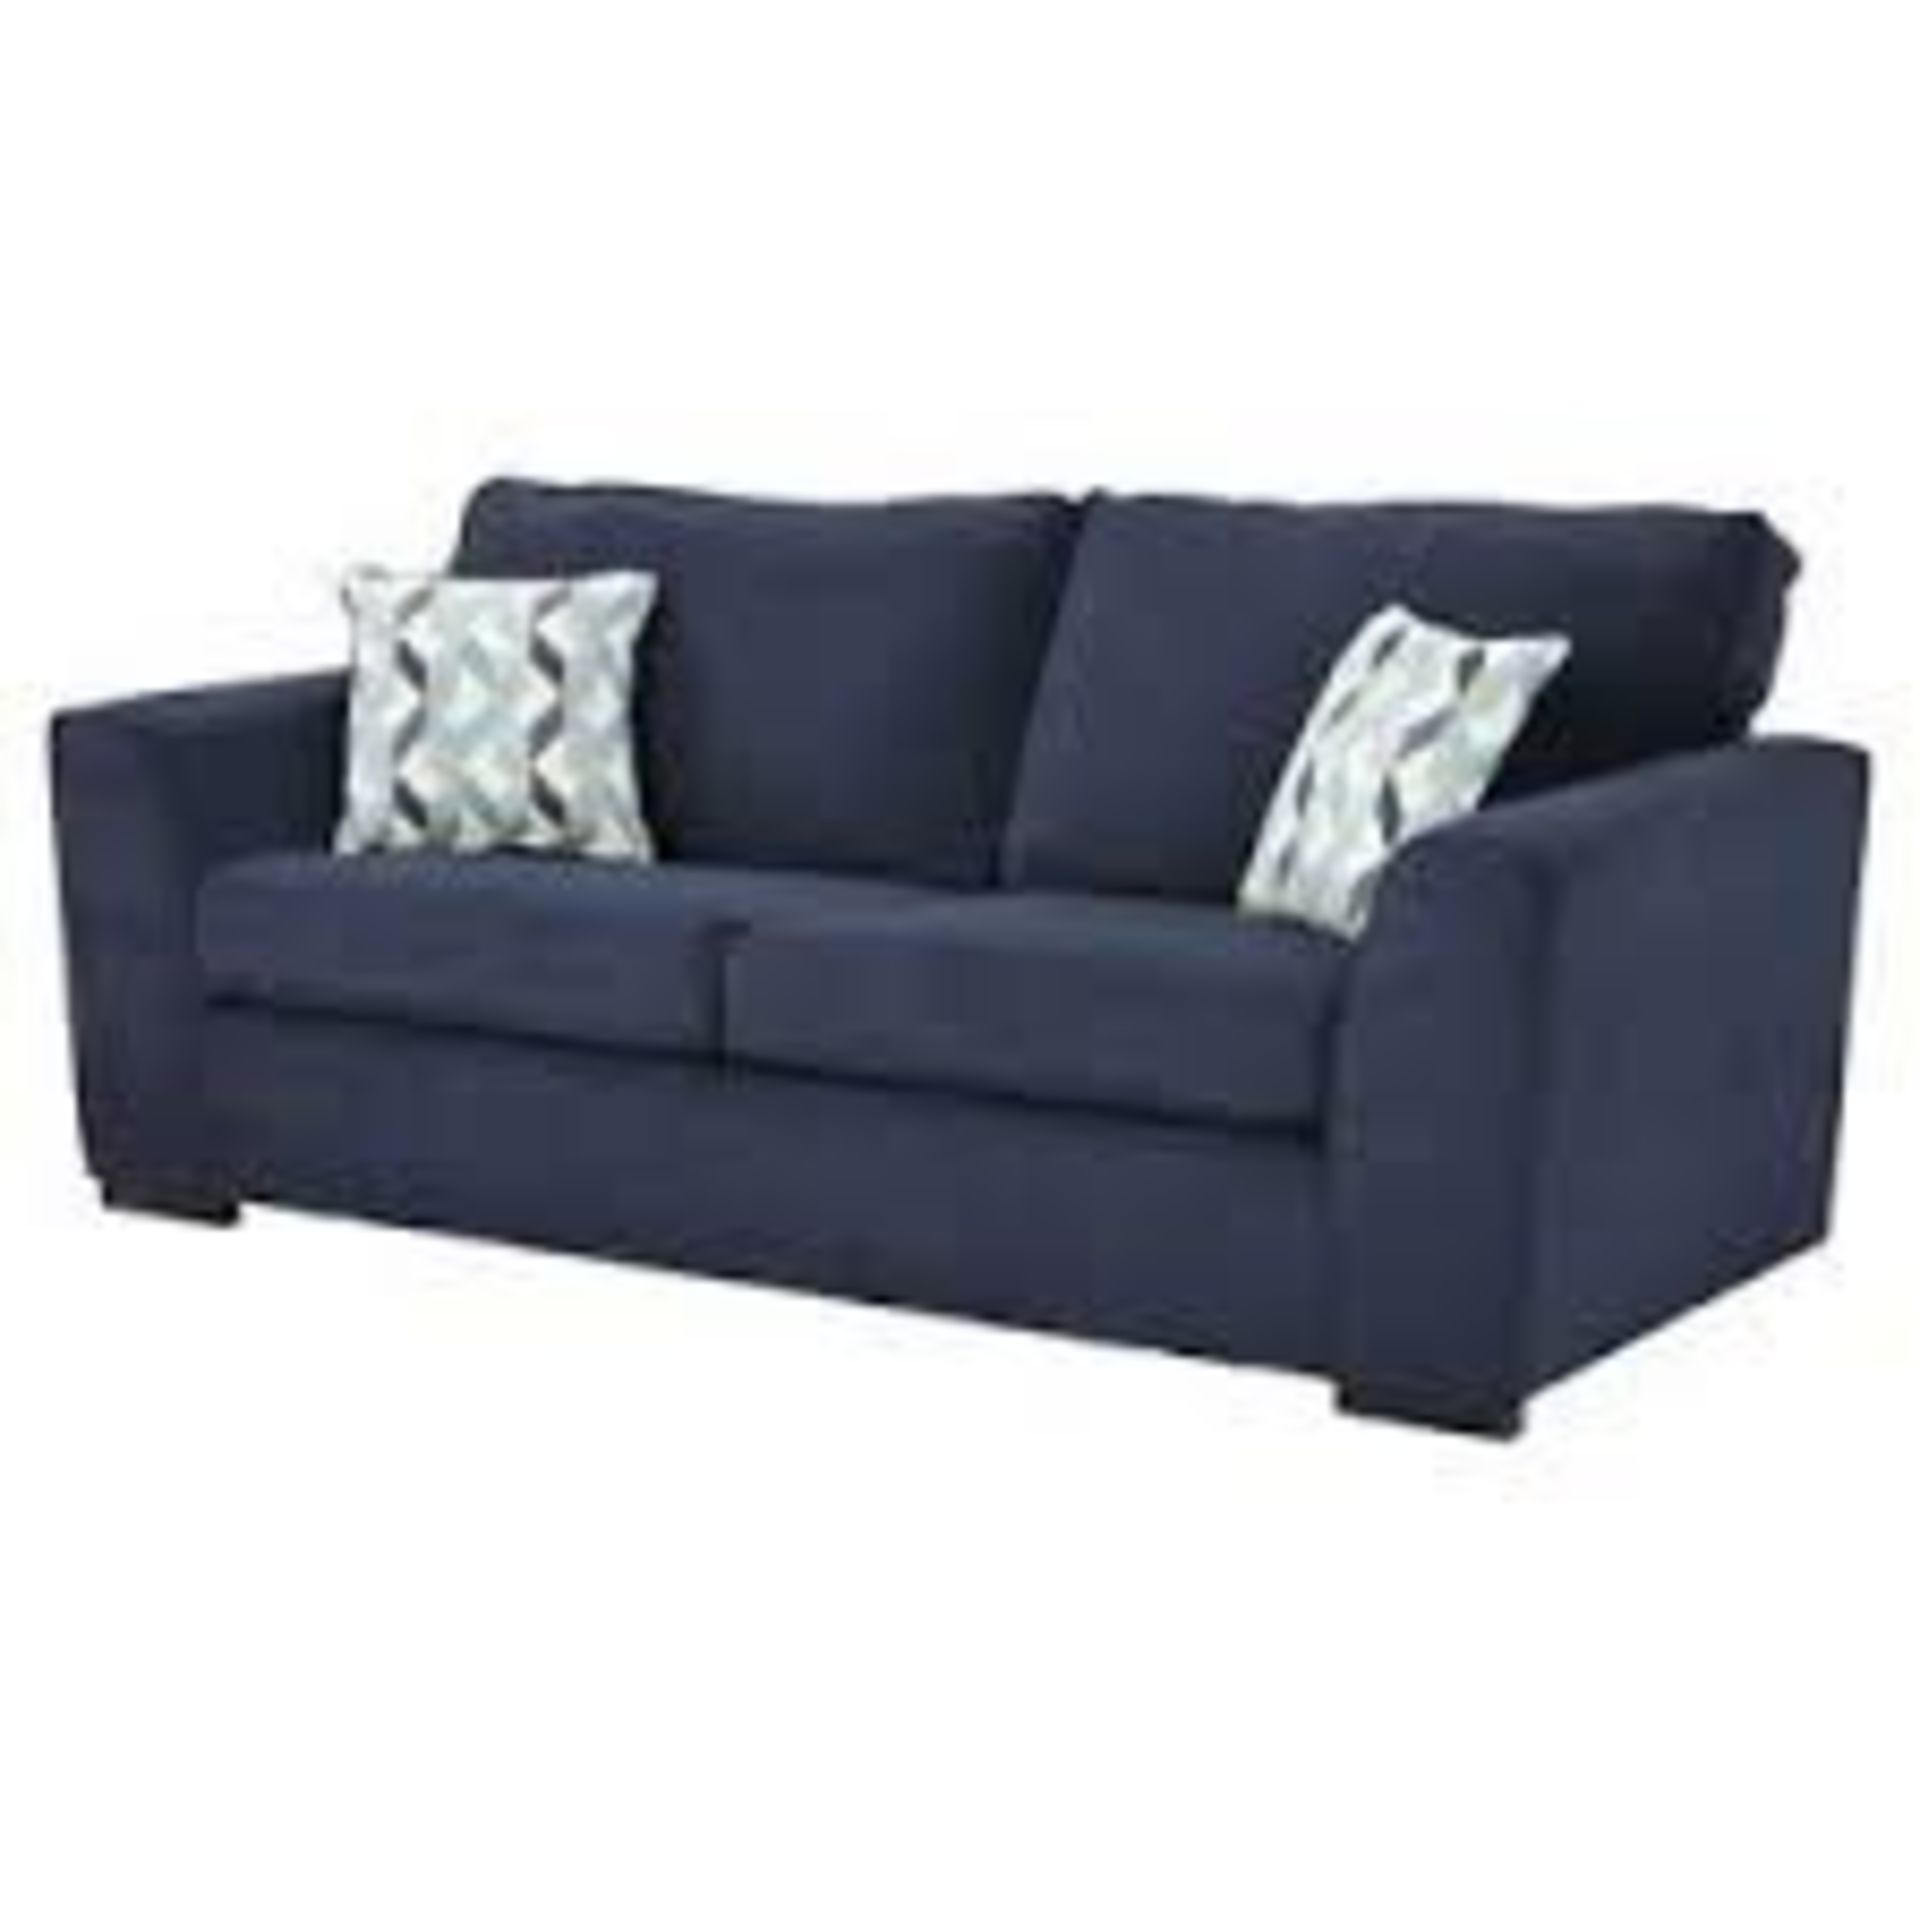 1 BRAND NEW BAGGED BOSTON 2.5 SEATER SOFA IN NAVY (VIEWING HIGHLY RECOMMENDED)